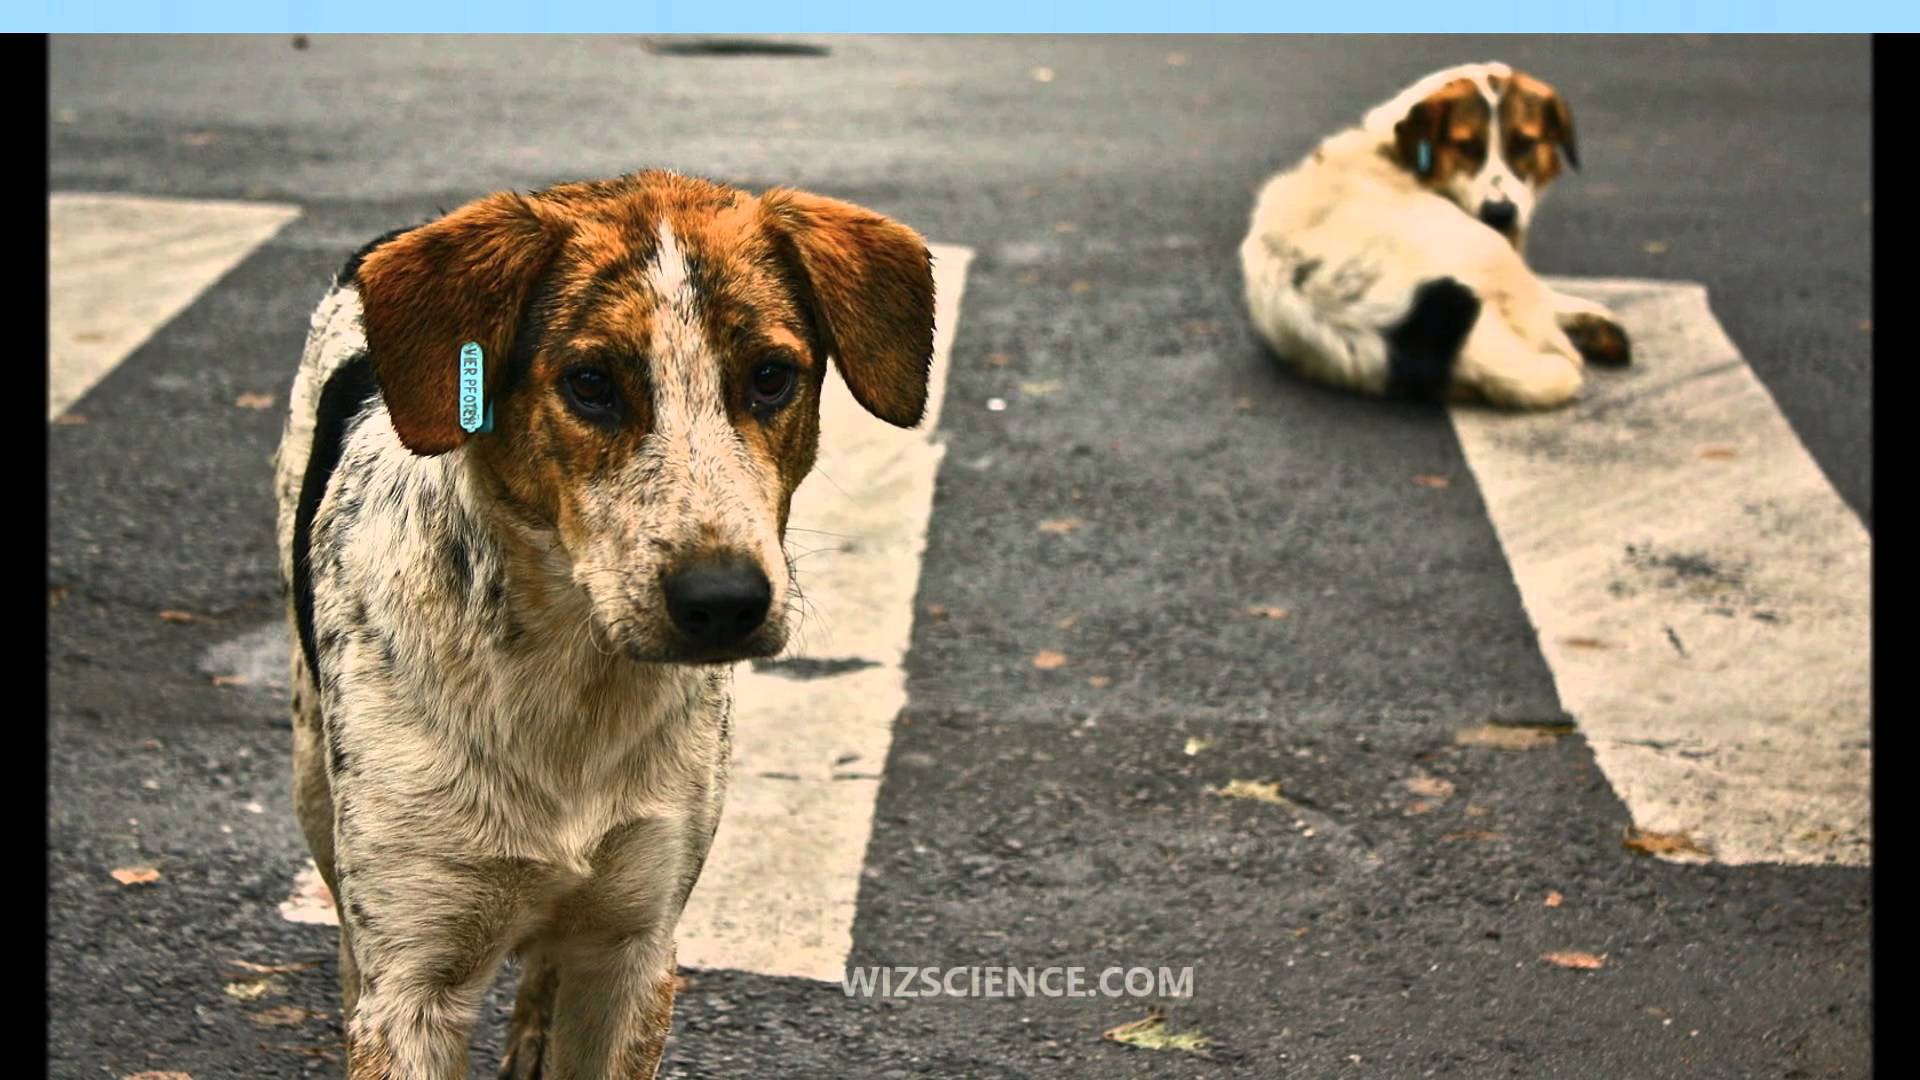 Street dog - Video Learning - WizScience.com - YouTube